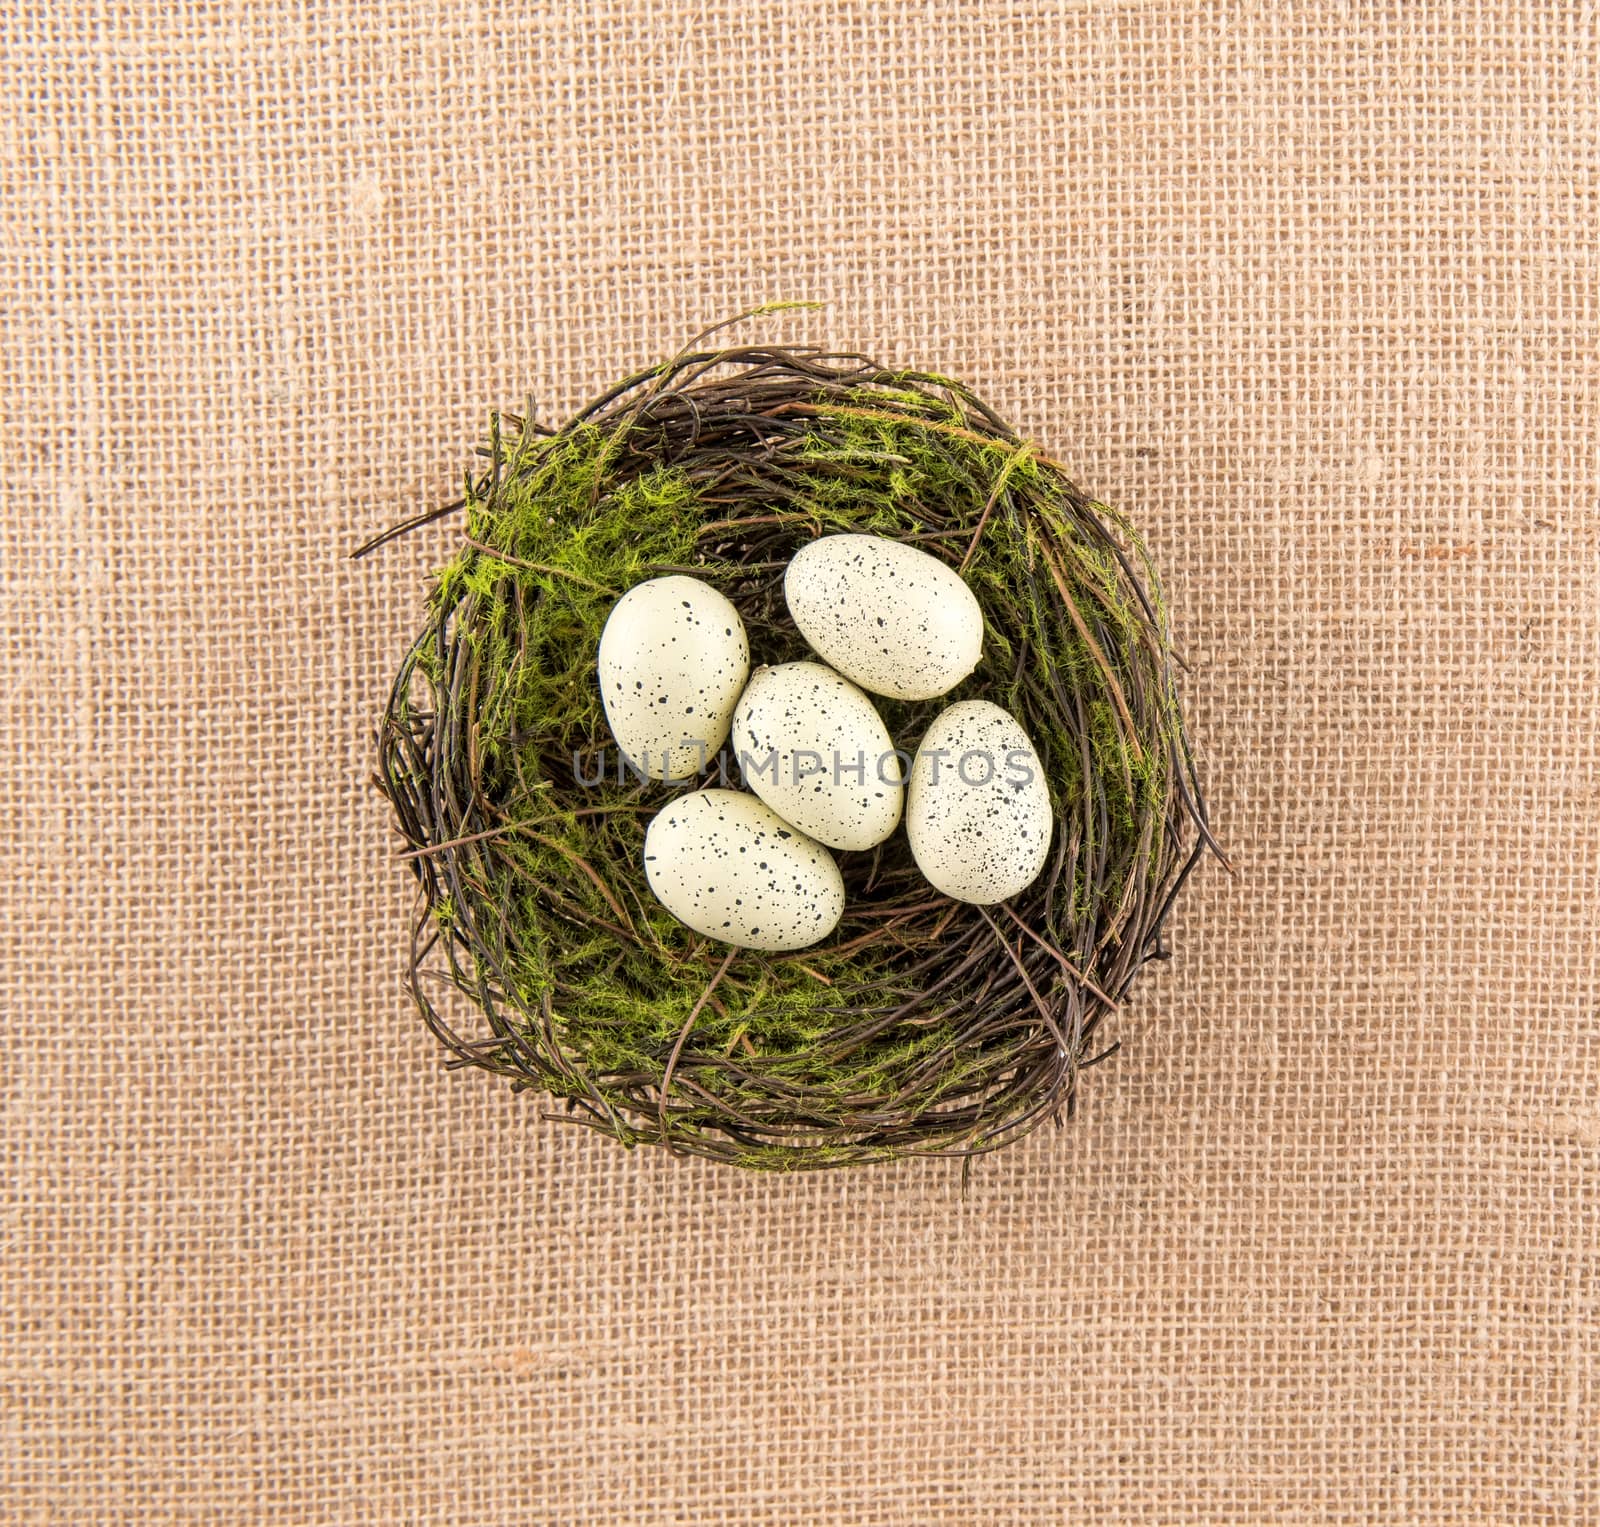 Ivory Speckled Eggs in Nest by krisblackphotography